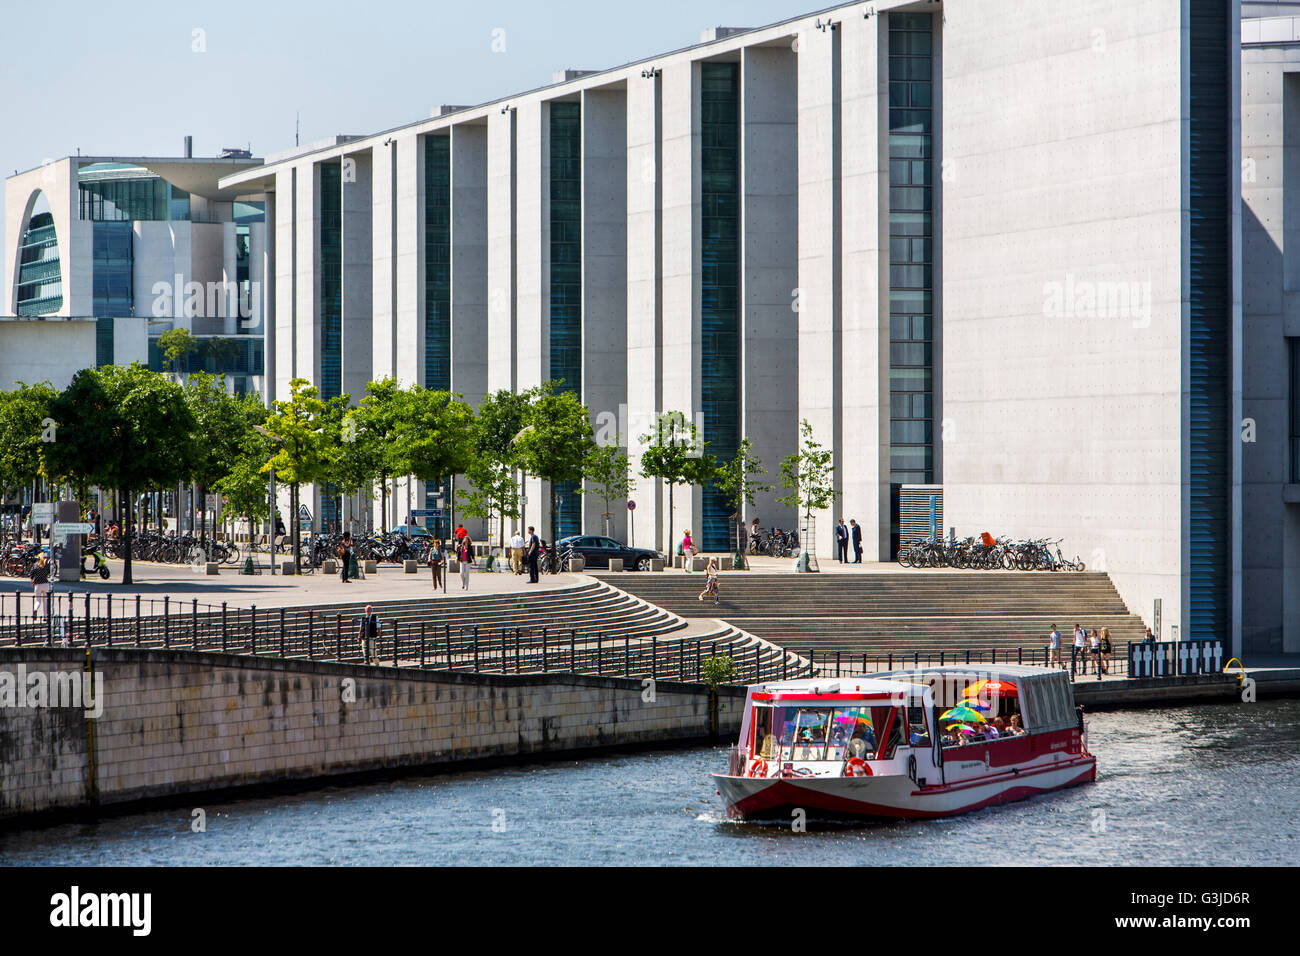 Sightseeing boat on the river Spree, Berlin, Germany, government district, Stock Photo